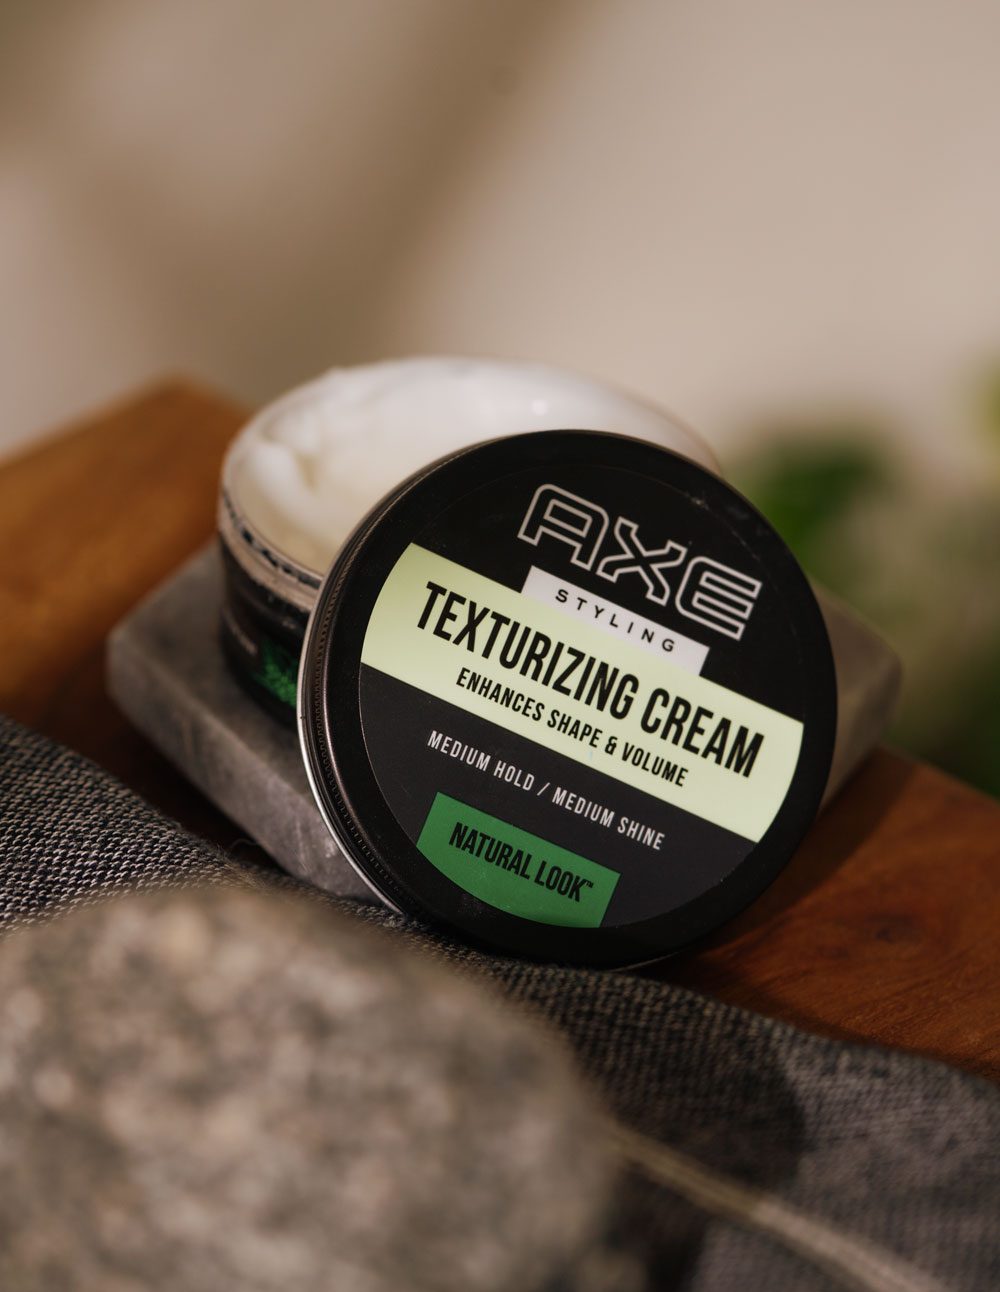 can of axe styling texturizing cream for natural look